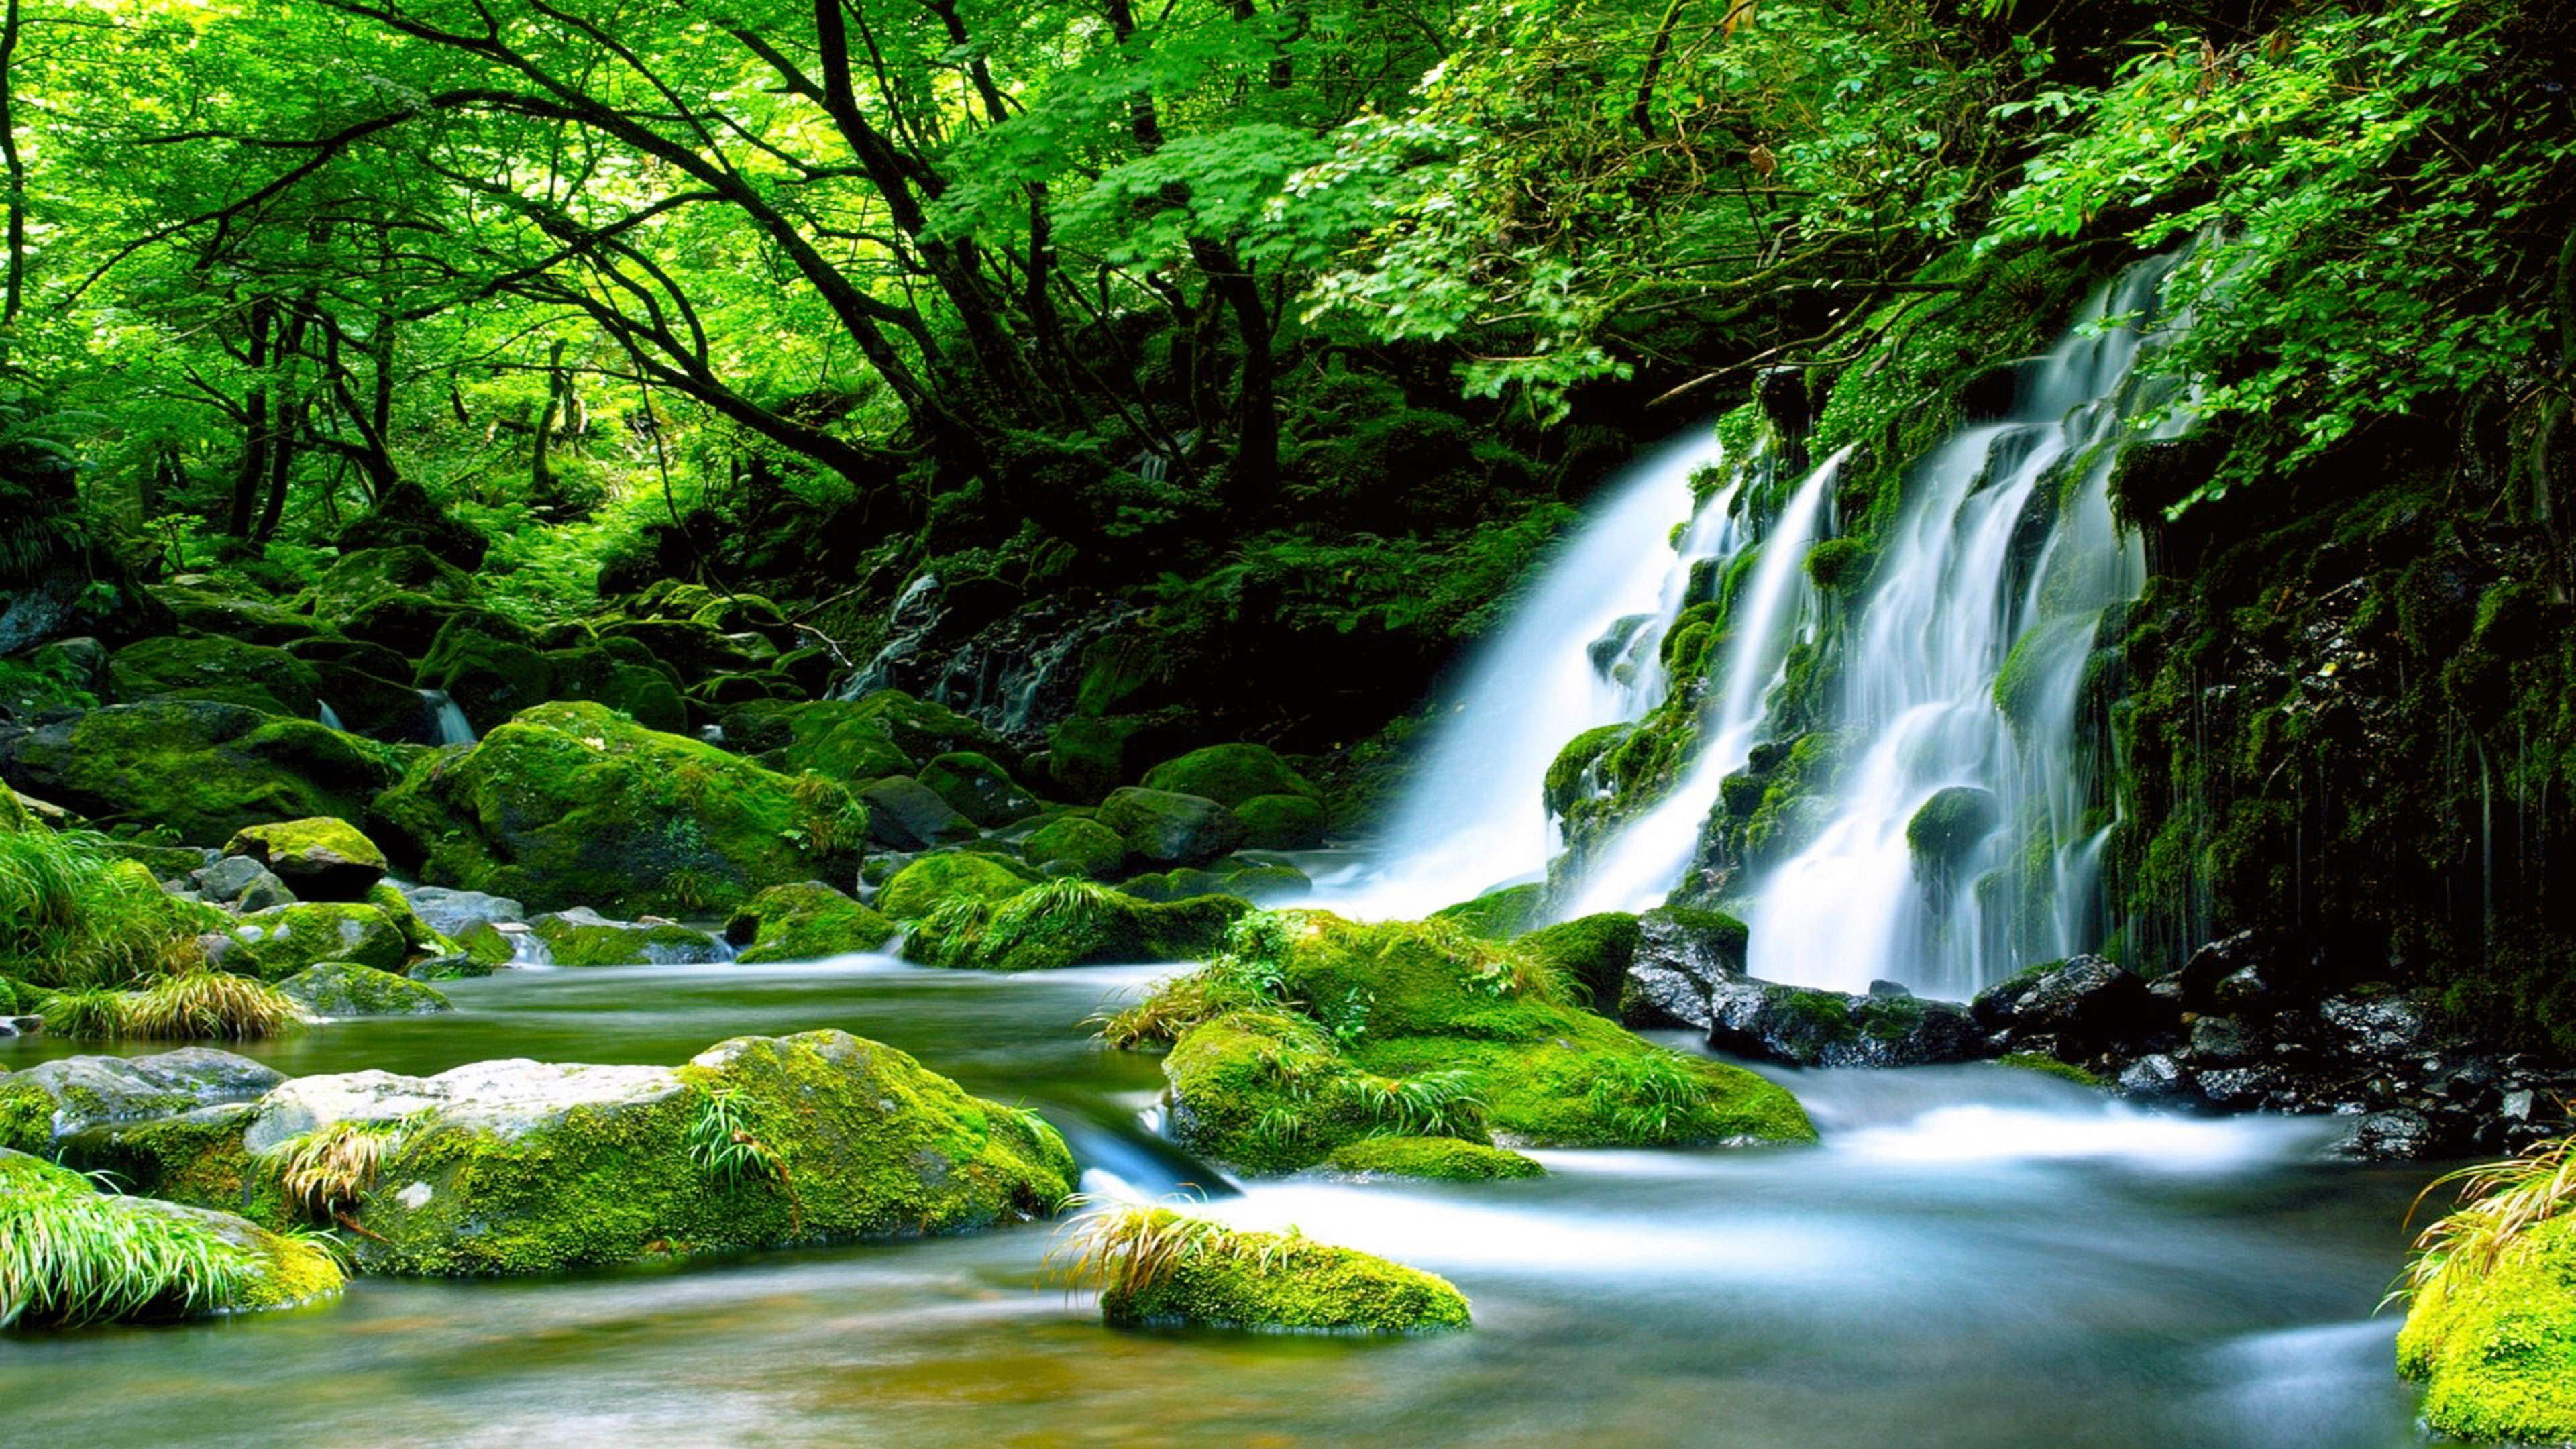 Green Waterfall River Rocks Covered With Green Moss Forest Waterfall Wallpaper HD High Definition 3840x2160, Wallpaper13.com